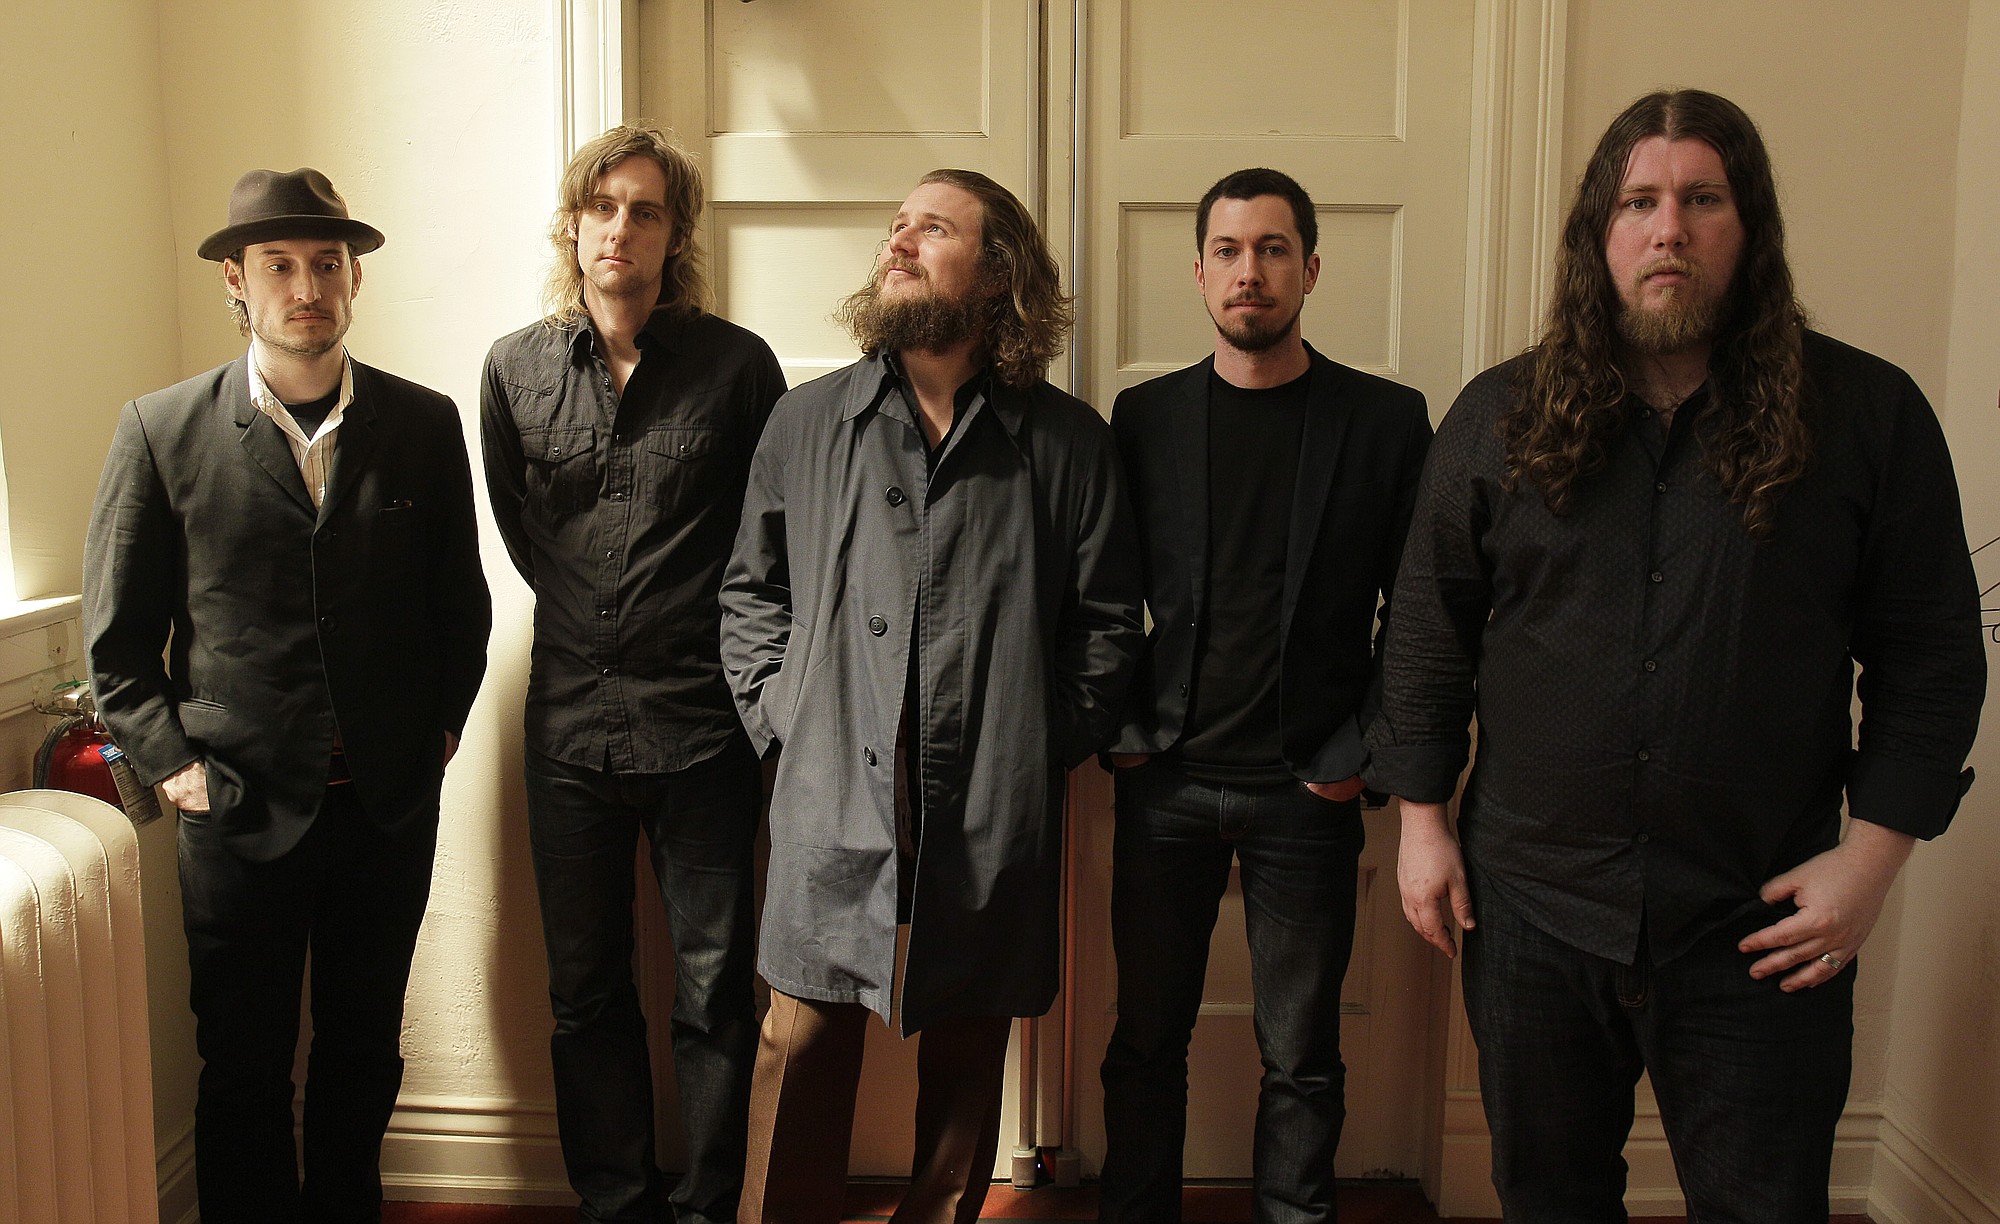 Ed Reinke/The Associated Press
Members of My Morning Jacket are Bo Koster, from left, Carl Broemel, Jim James, Tom Blankenship and Patrick Hallahan.